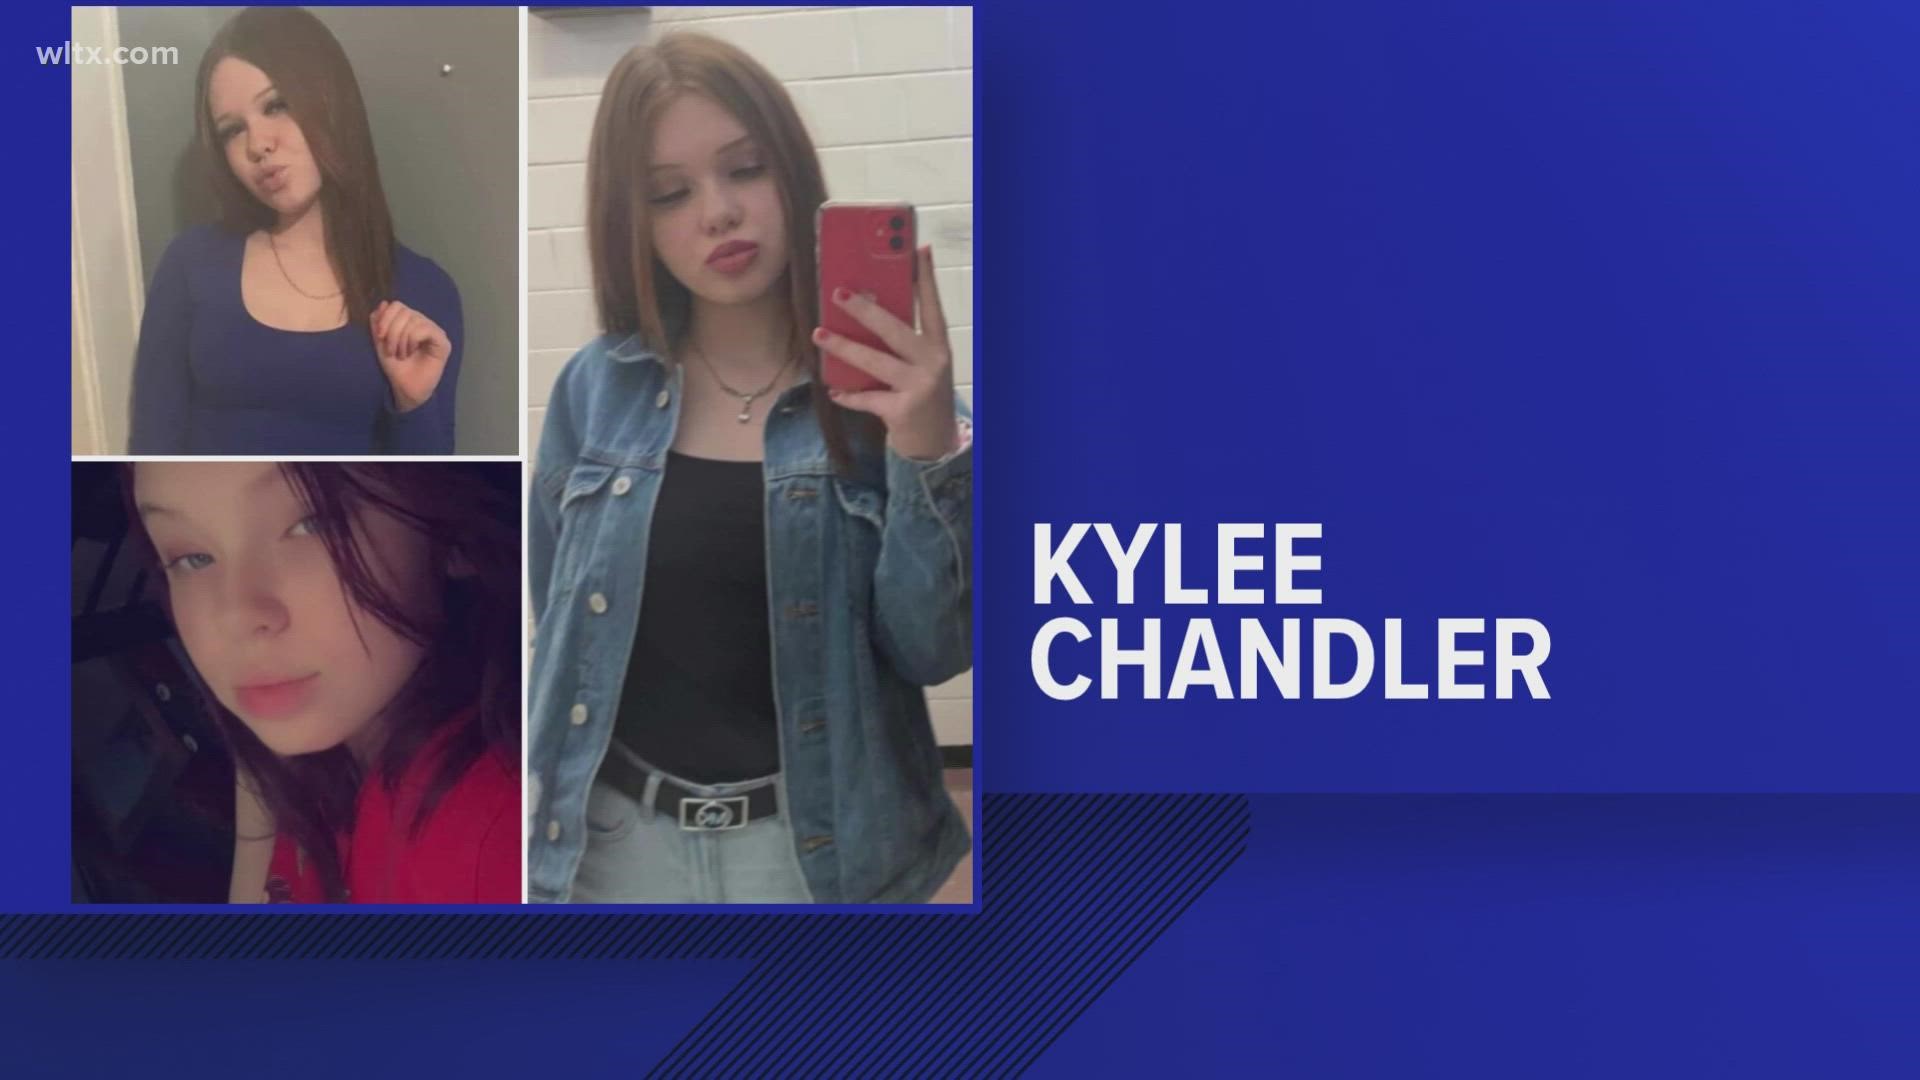 Deputies say the 13-year-old was last seen on Sept. 16 when she left her home in Lexington County.